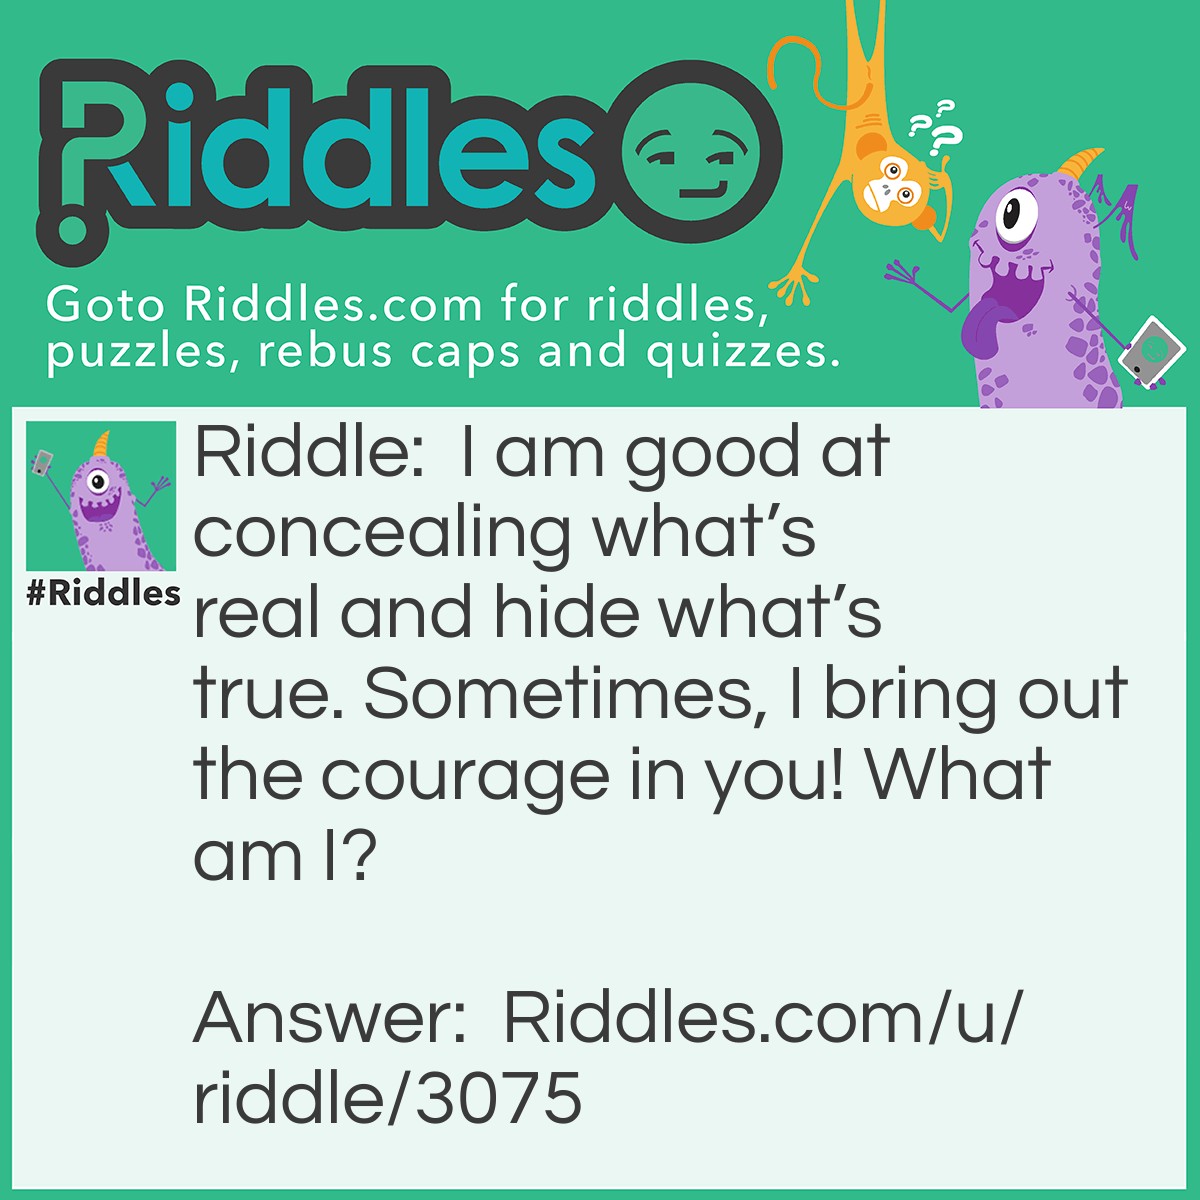 Riddle: I am good at concealing what's real and hide what's true. Sometimes, I bring out the courage in you! What am I? Answer: Makeup.